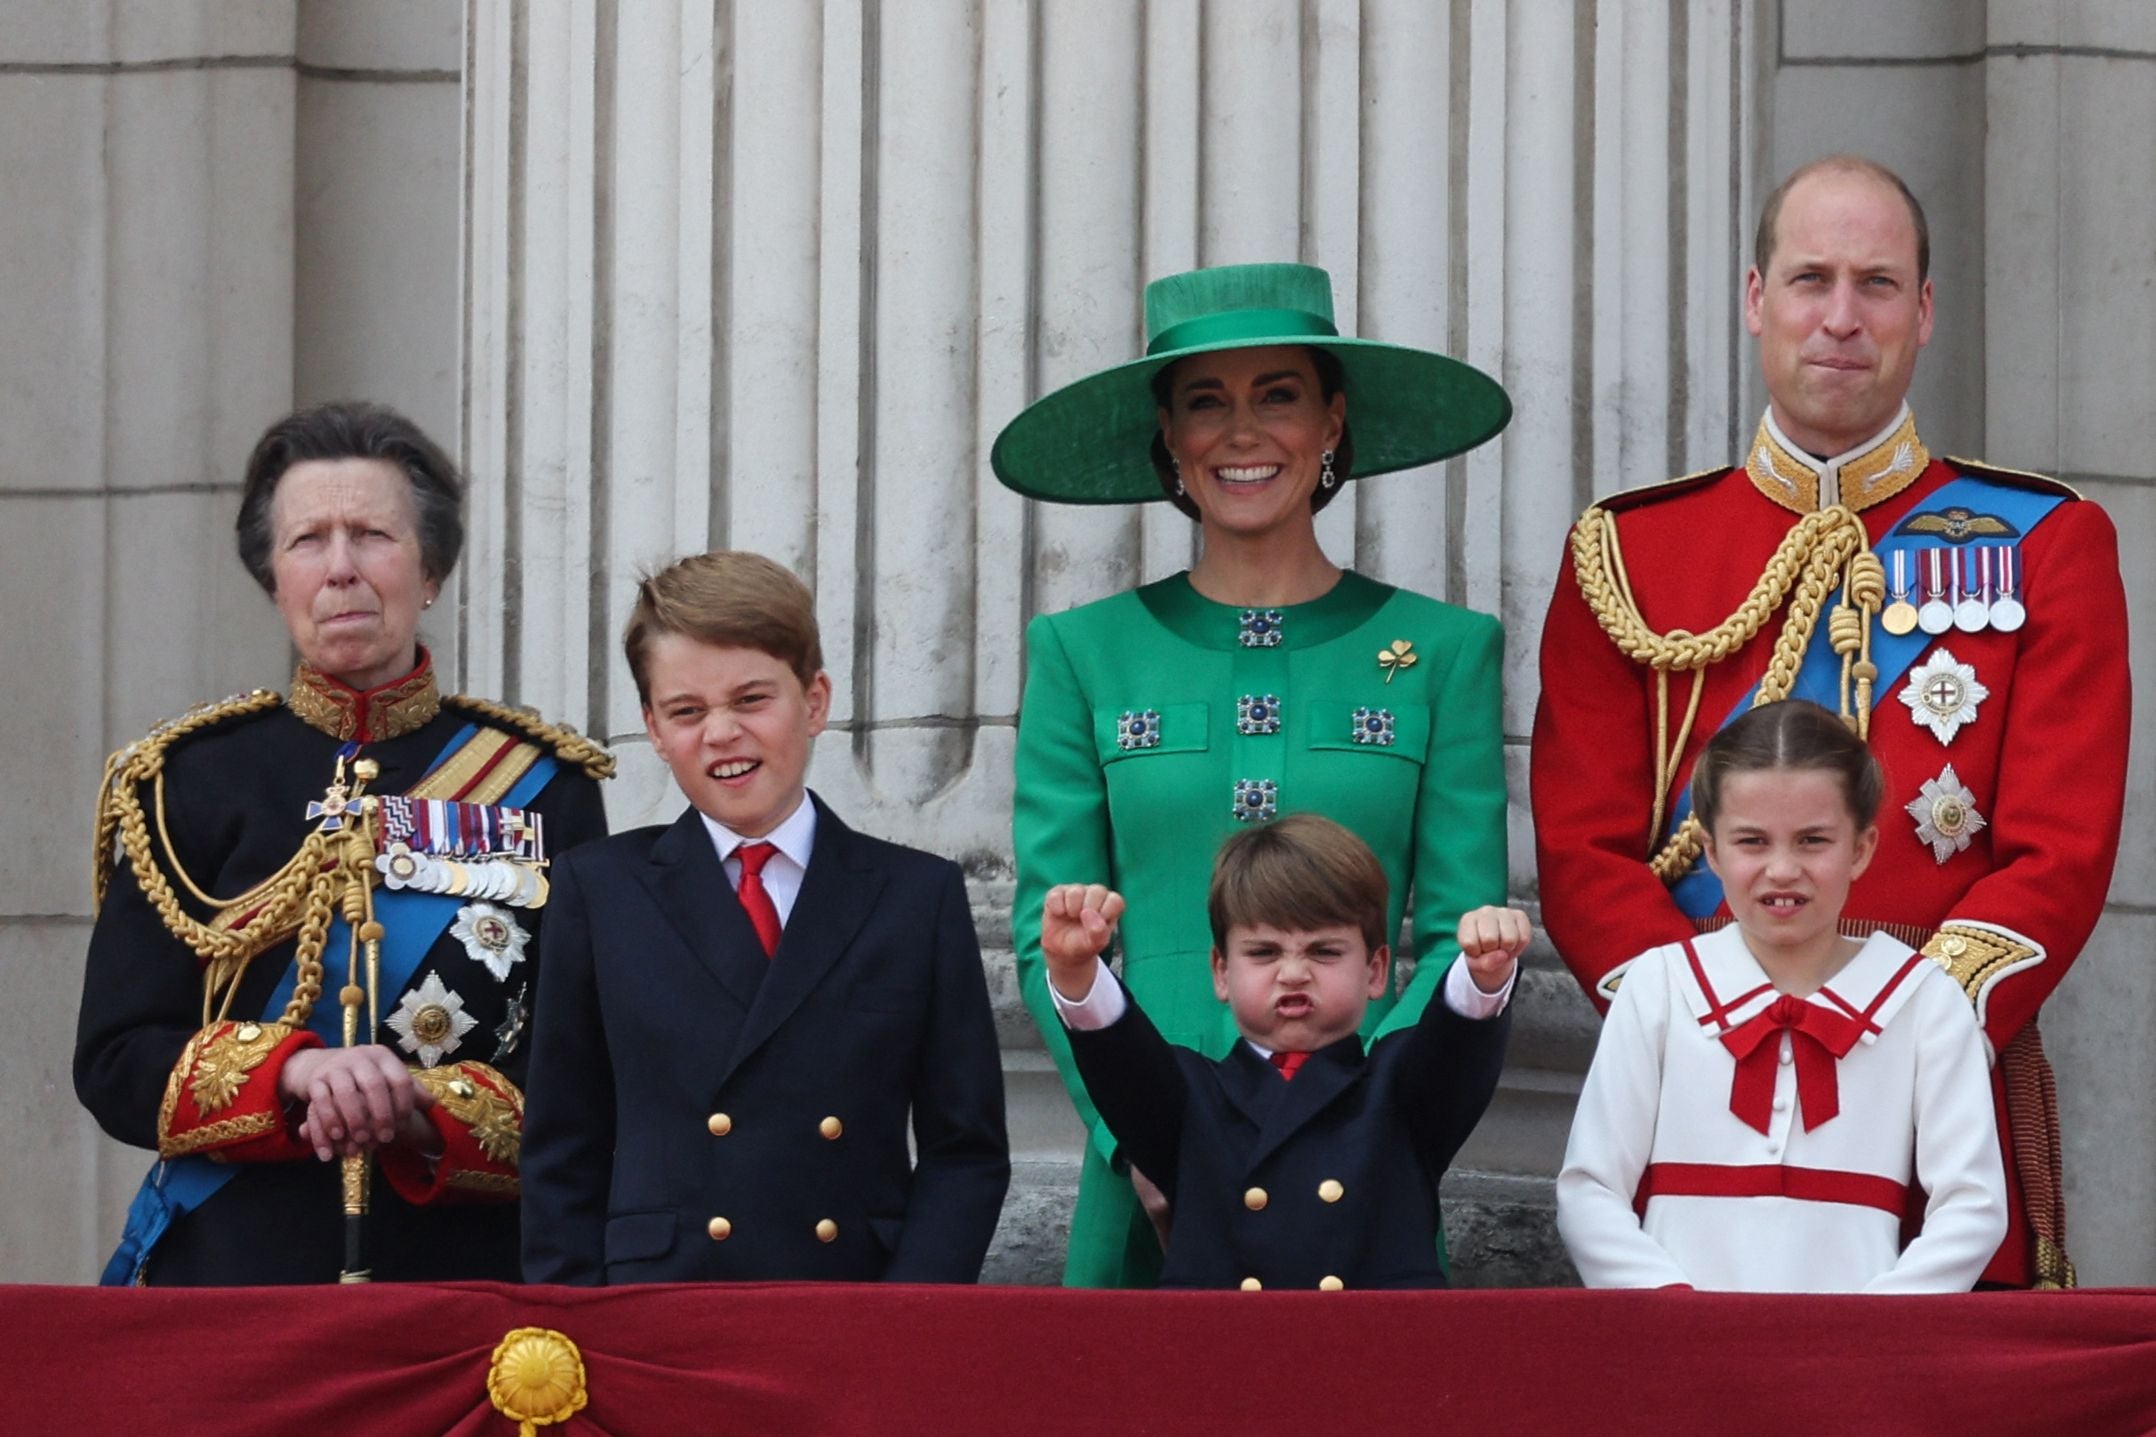 Prince Louis famously pretended to fly a plane at Trooping the Colour